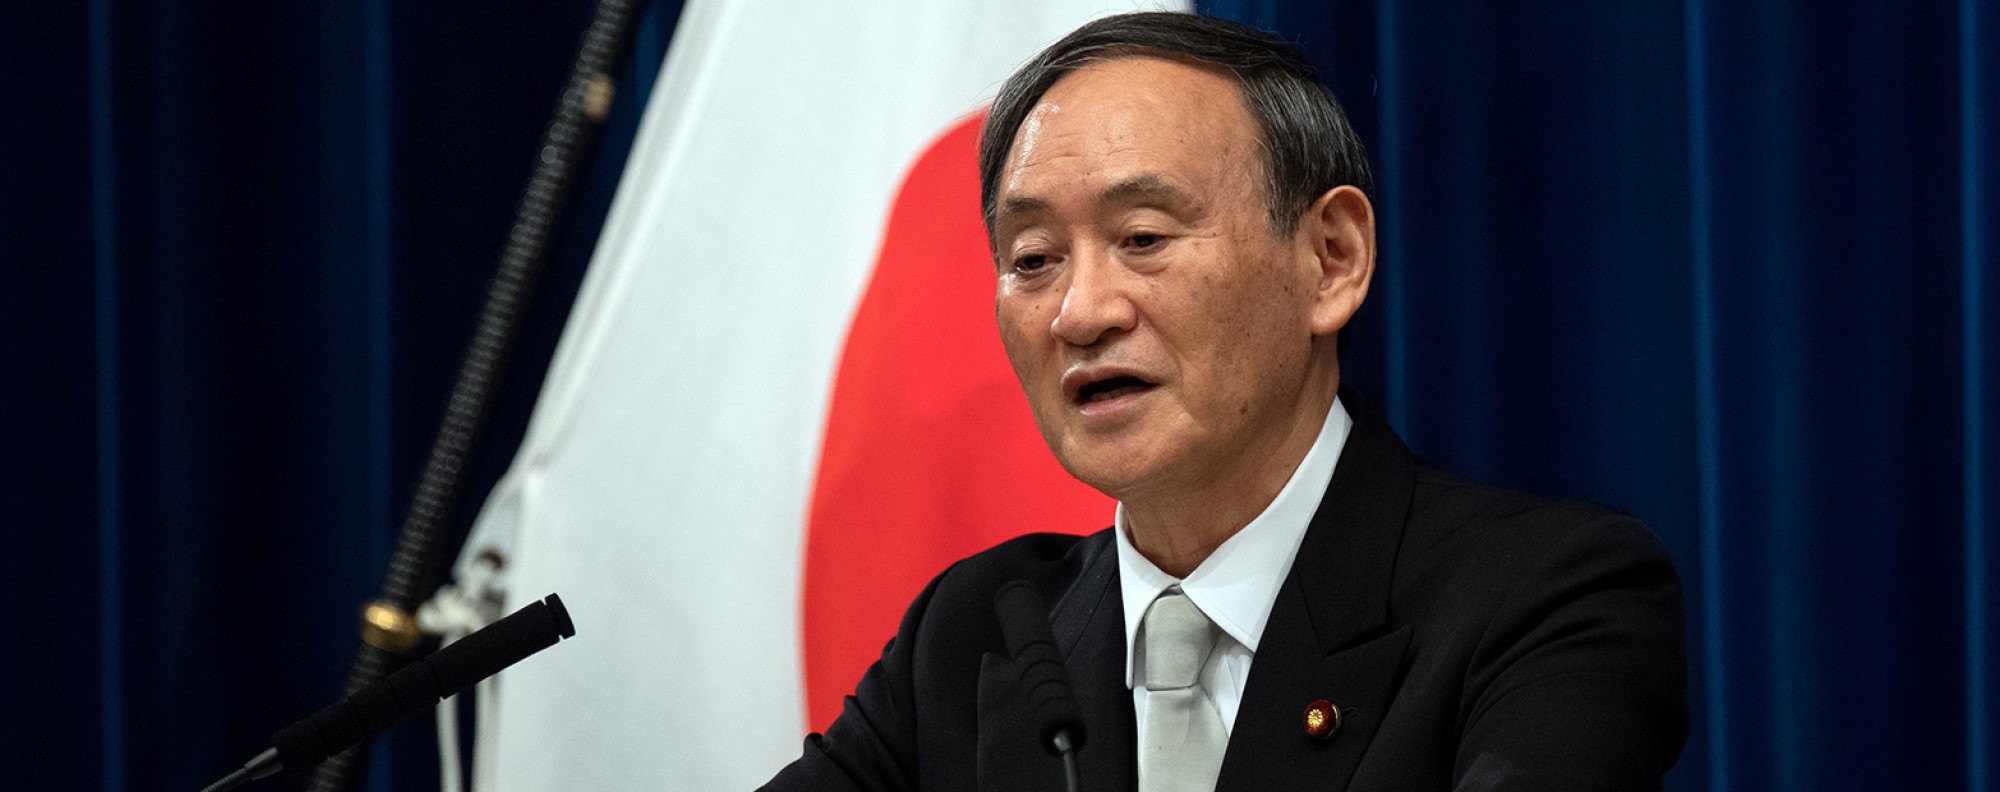 Yoshihide Suga speaks during a news conference following his confirmation as Prime Minister of Japan in Tokyo, Japan September 16, 2020. Photo: Reuters